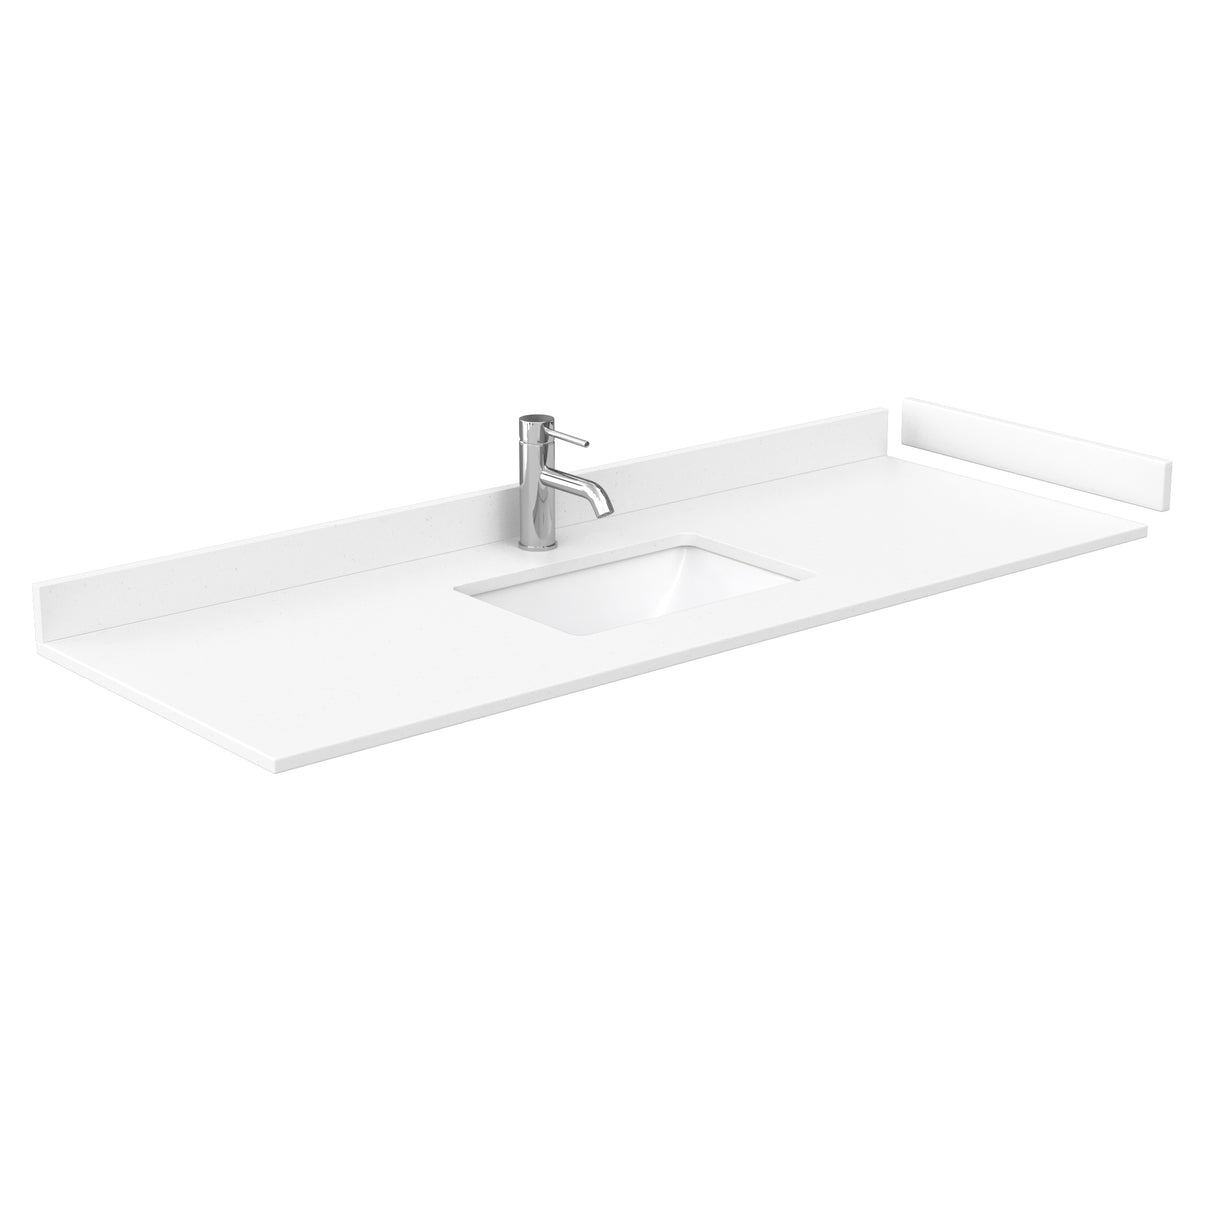 Amici 60 Inch Single Bathroom Vanity in White White Cultured Marble Countertop Undermount Square Sink Brushed Nickel Trim